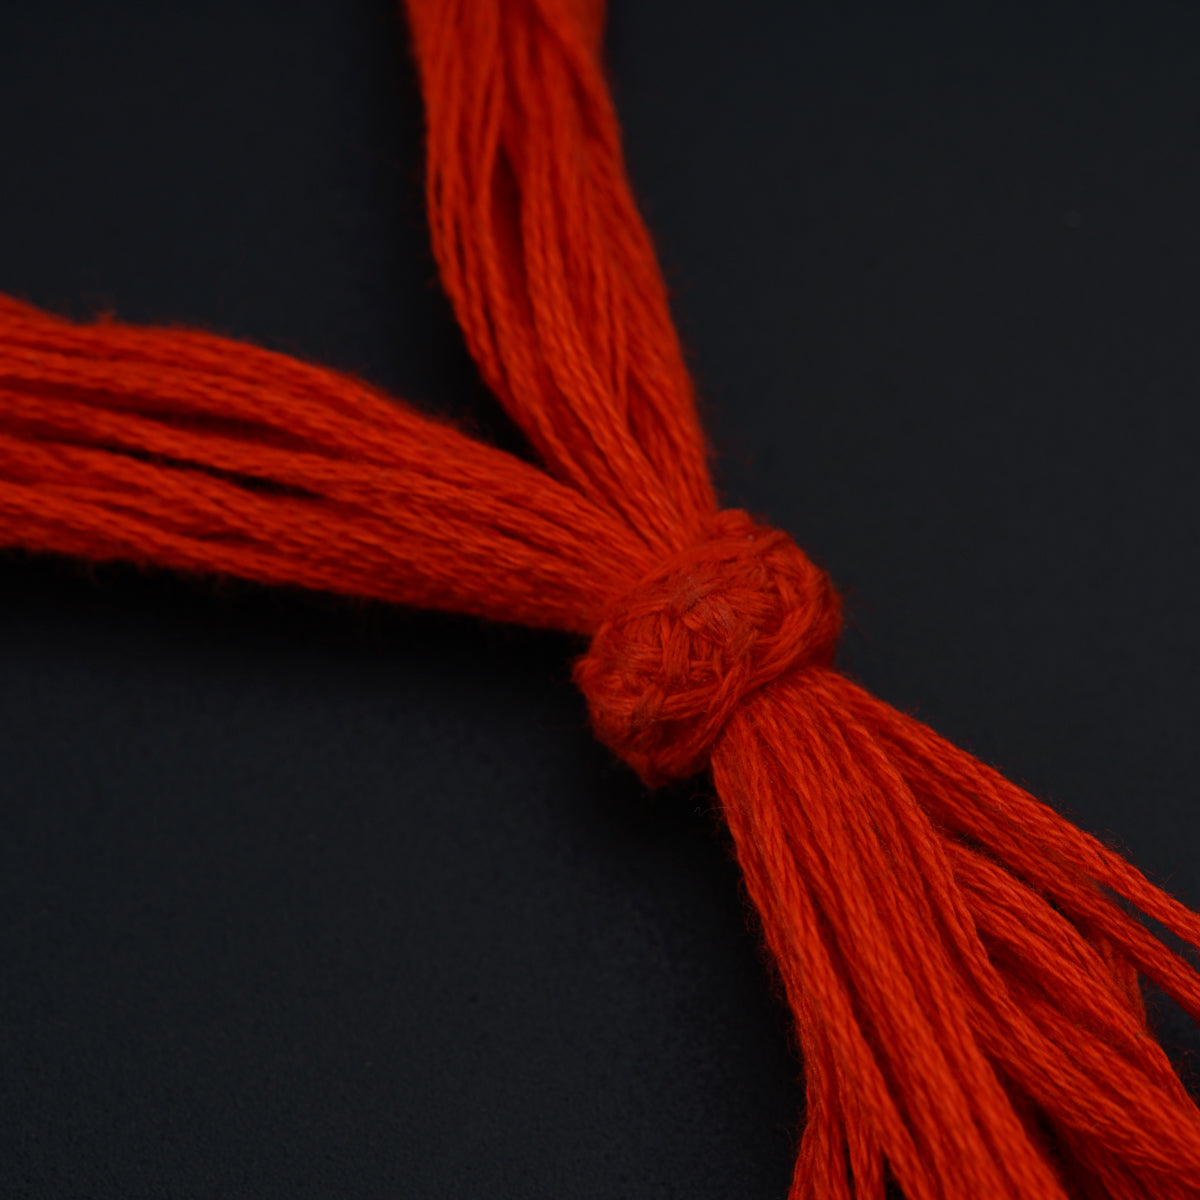 a close up of a red string on a black surface